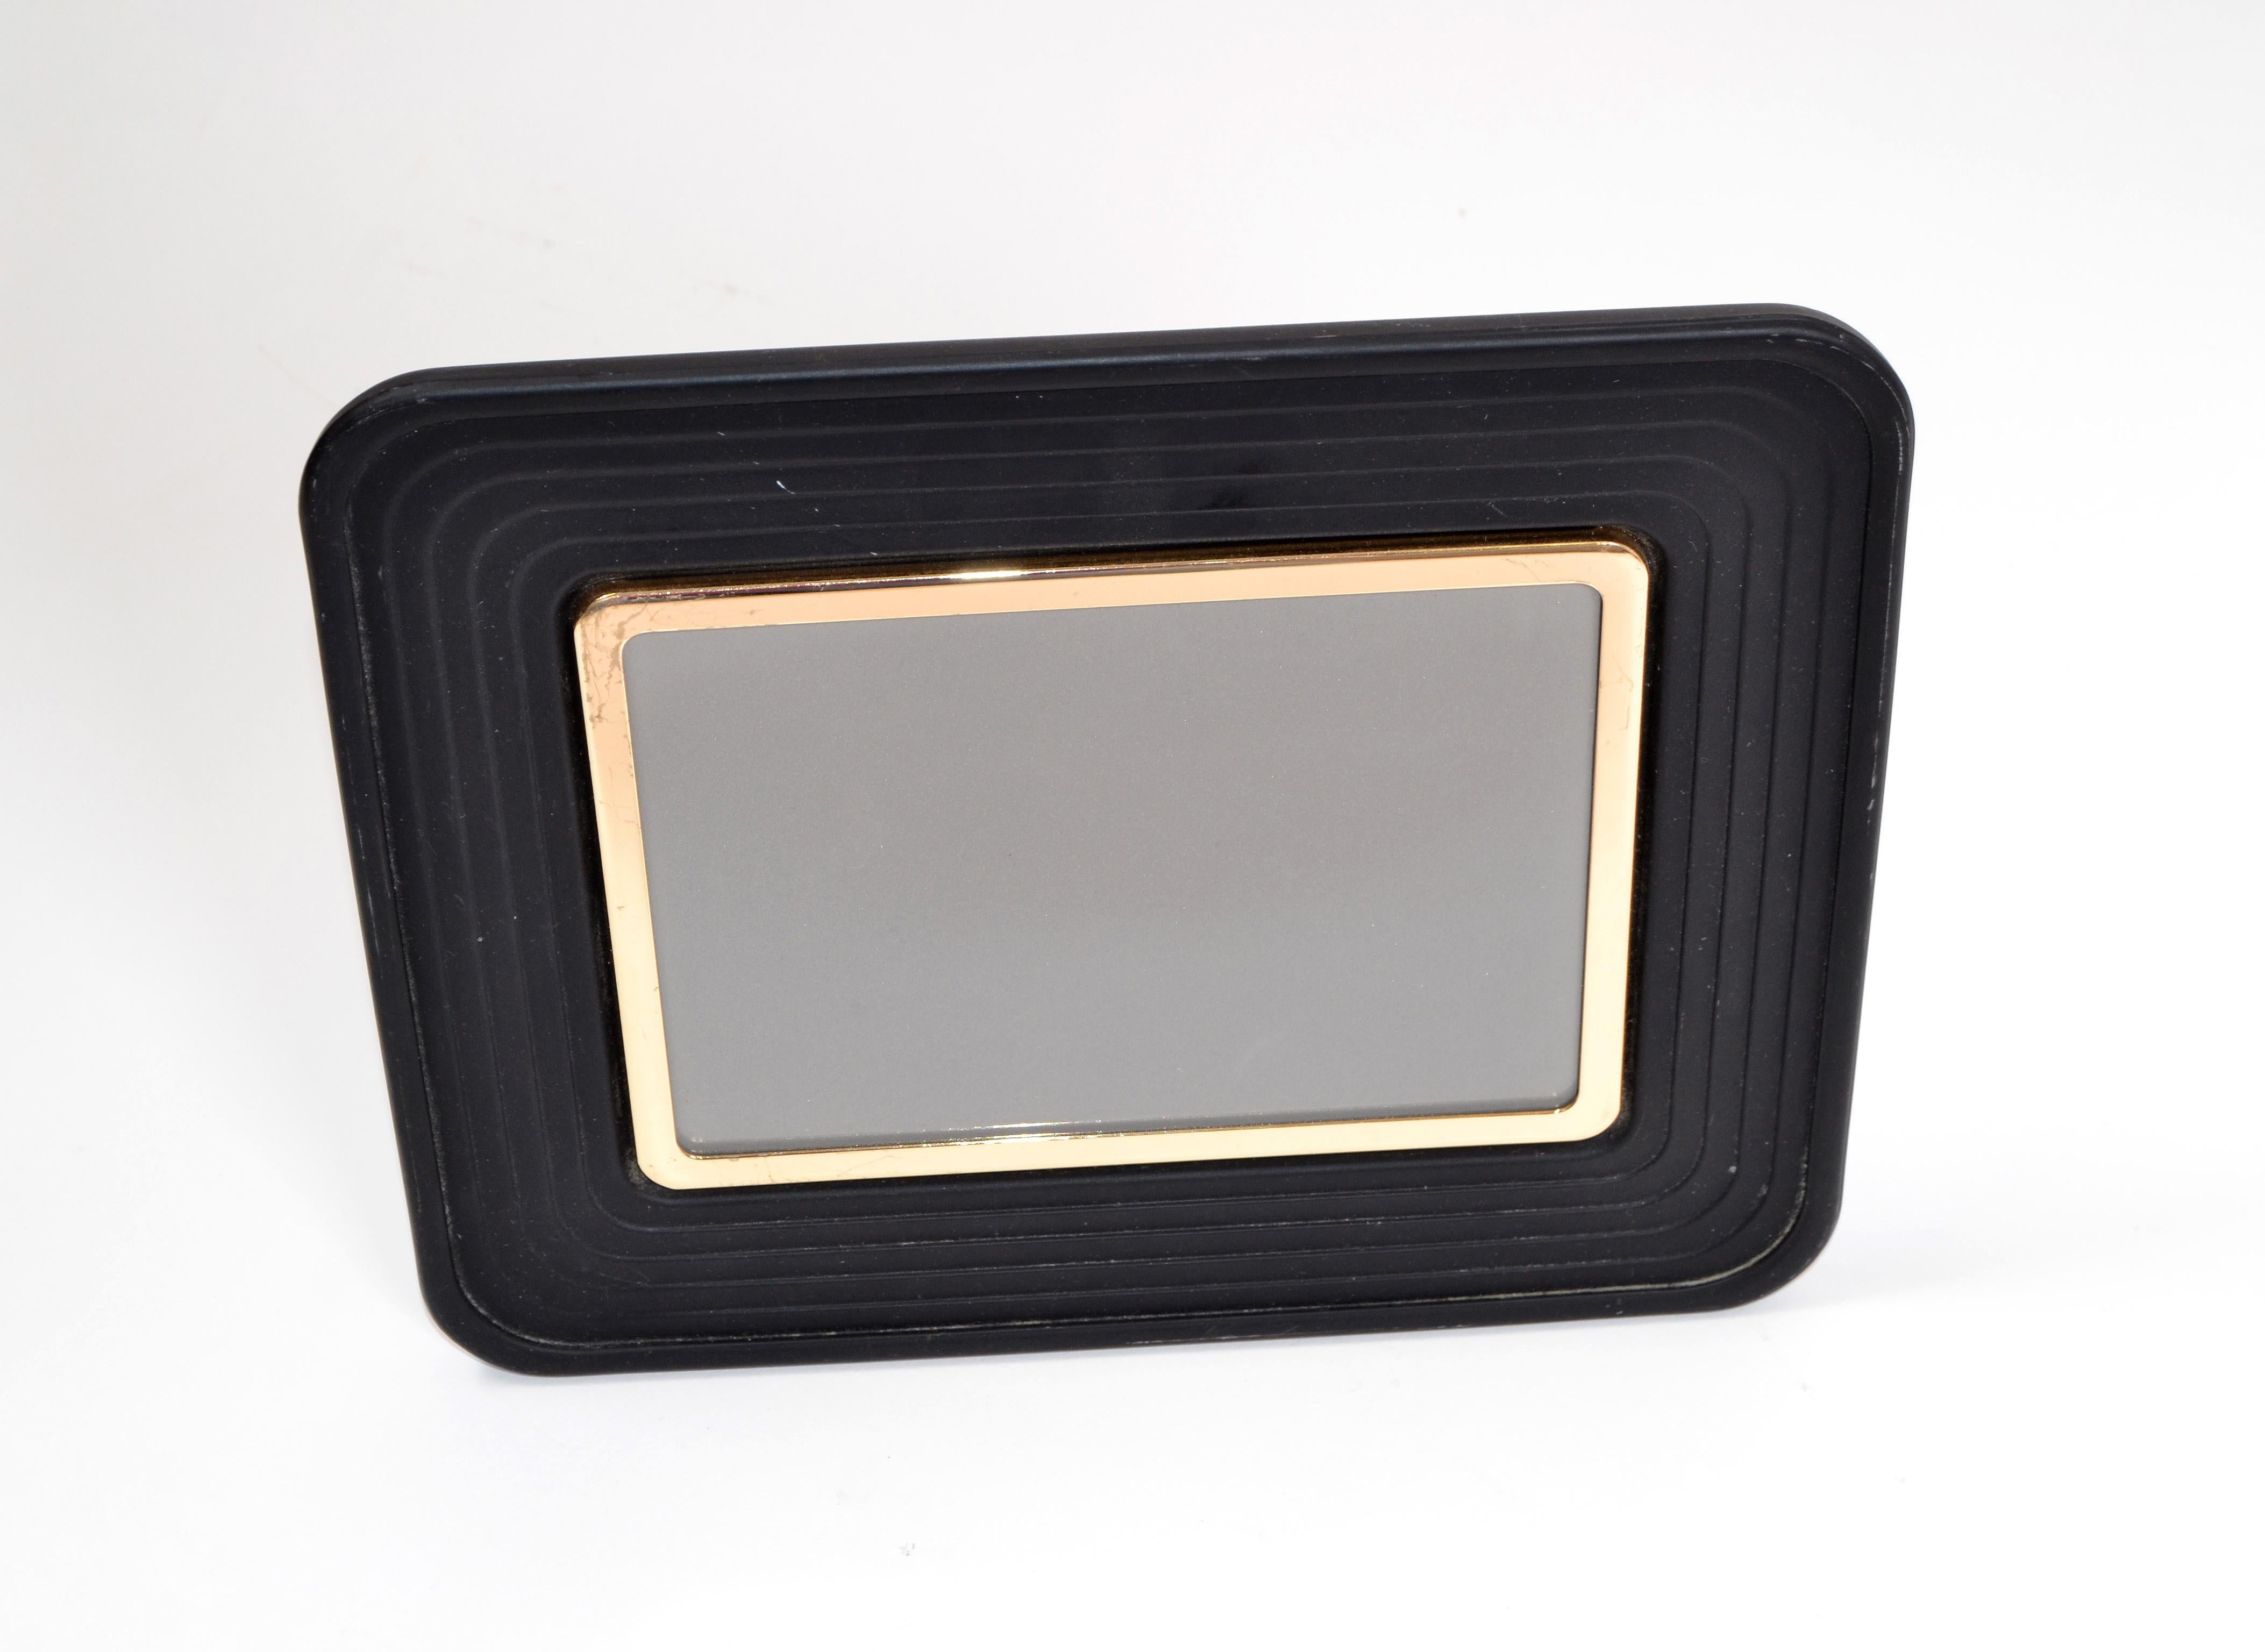 Pierre Cardin style Mid-Century Modern bronze and resin picture frame black and gold.
Picture Size: 6.5 x 4.5 inches.
Can be placed horizontally as well as vertically.